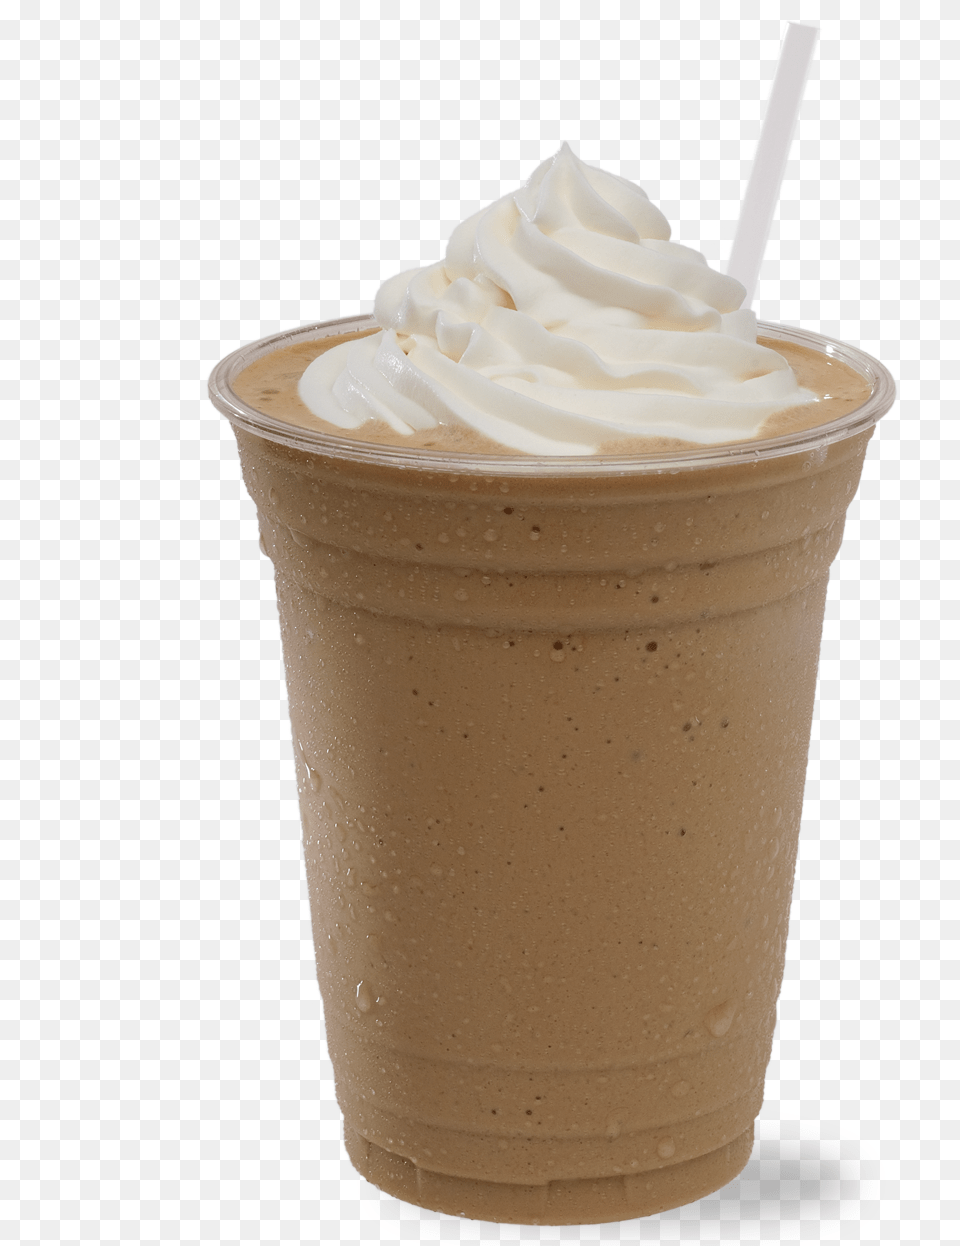 Frappuccino Images In Frappuccino, Cream, Dessert, Food, Whipped Cream Free Transparent Png